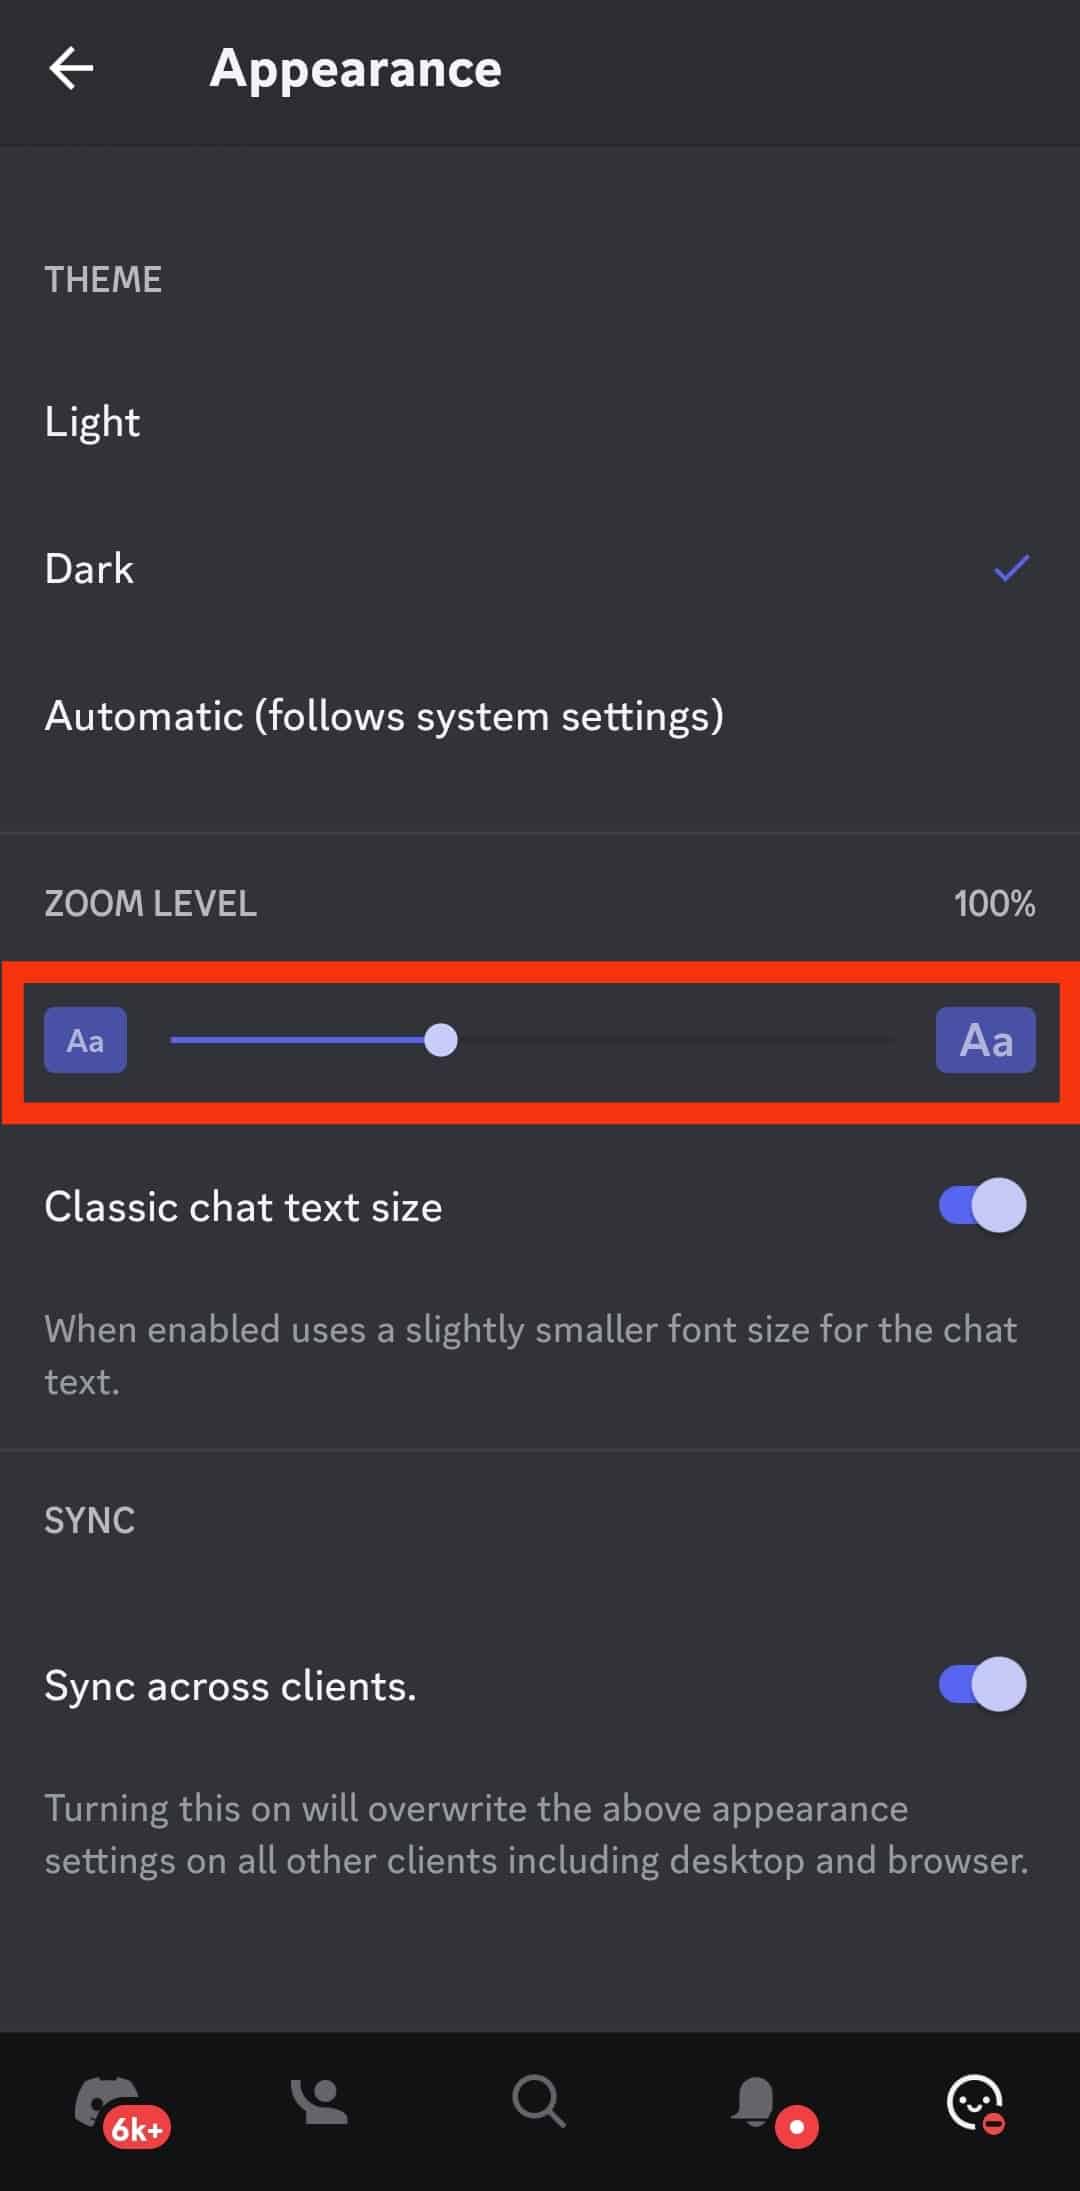 Locate The Slider Under The Zoom Level Section